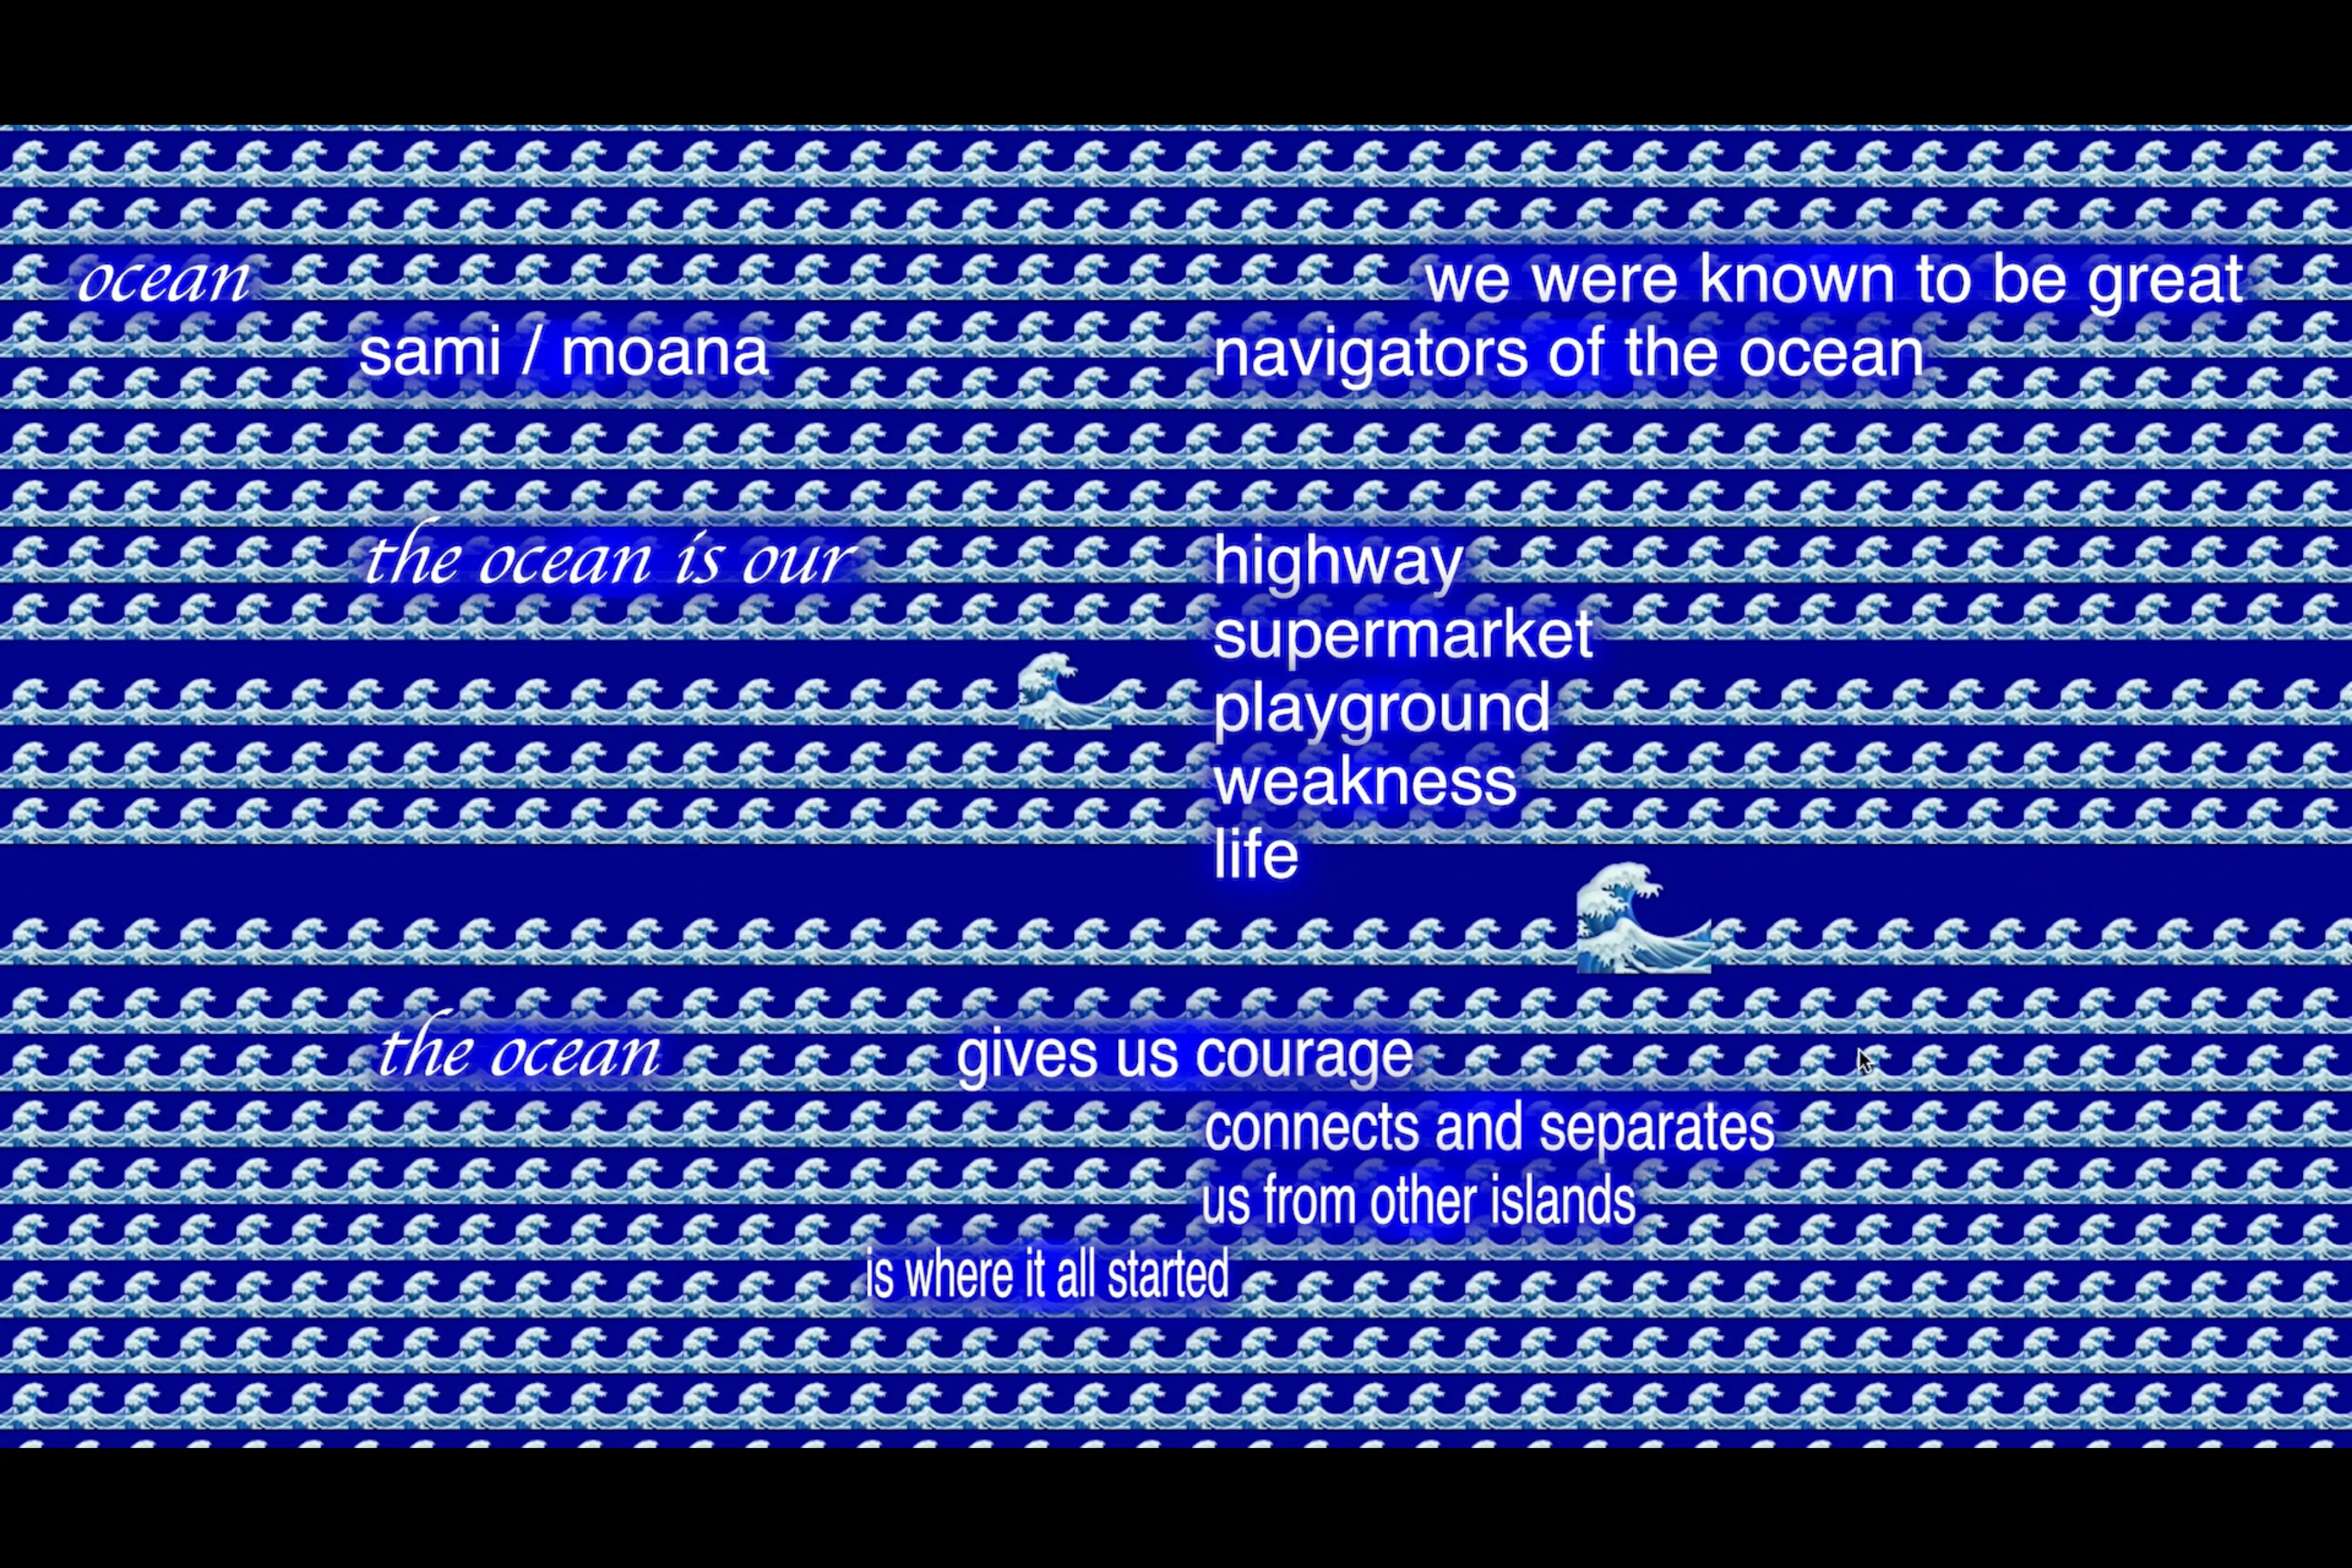 Over a dark blue background covered in rows of wave emojis, white text reads: ocean. sami/moana. we were known to be great navigators of the ocean. the ocean is our... highway. supermarket. playground. weakness. life. the ocean... gives us courage. connects and separates us from other islands. is where it all started.